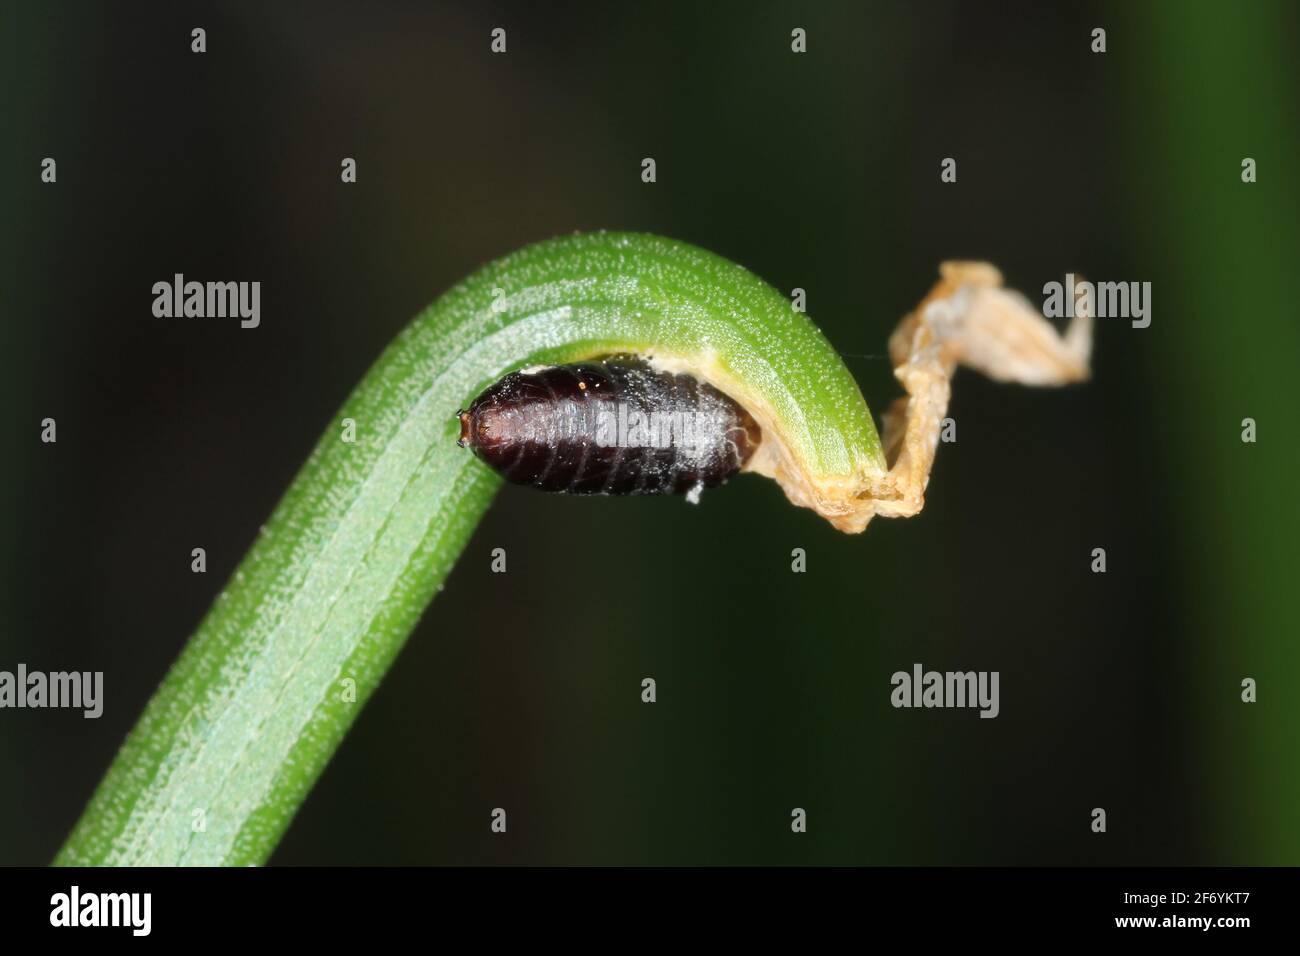 Pupa of fly on damaged chives. Stock Photo